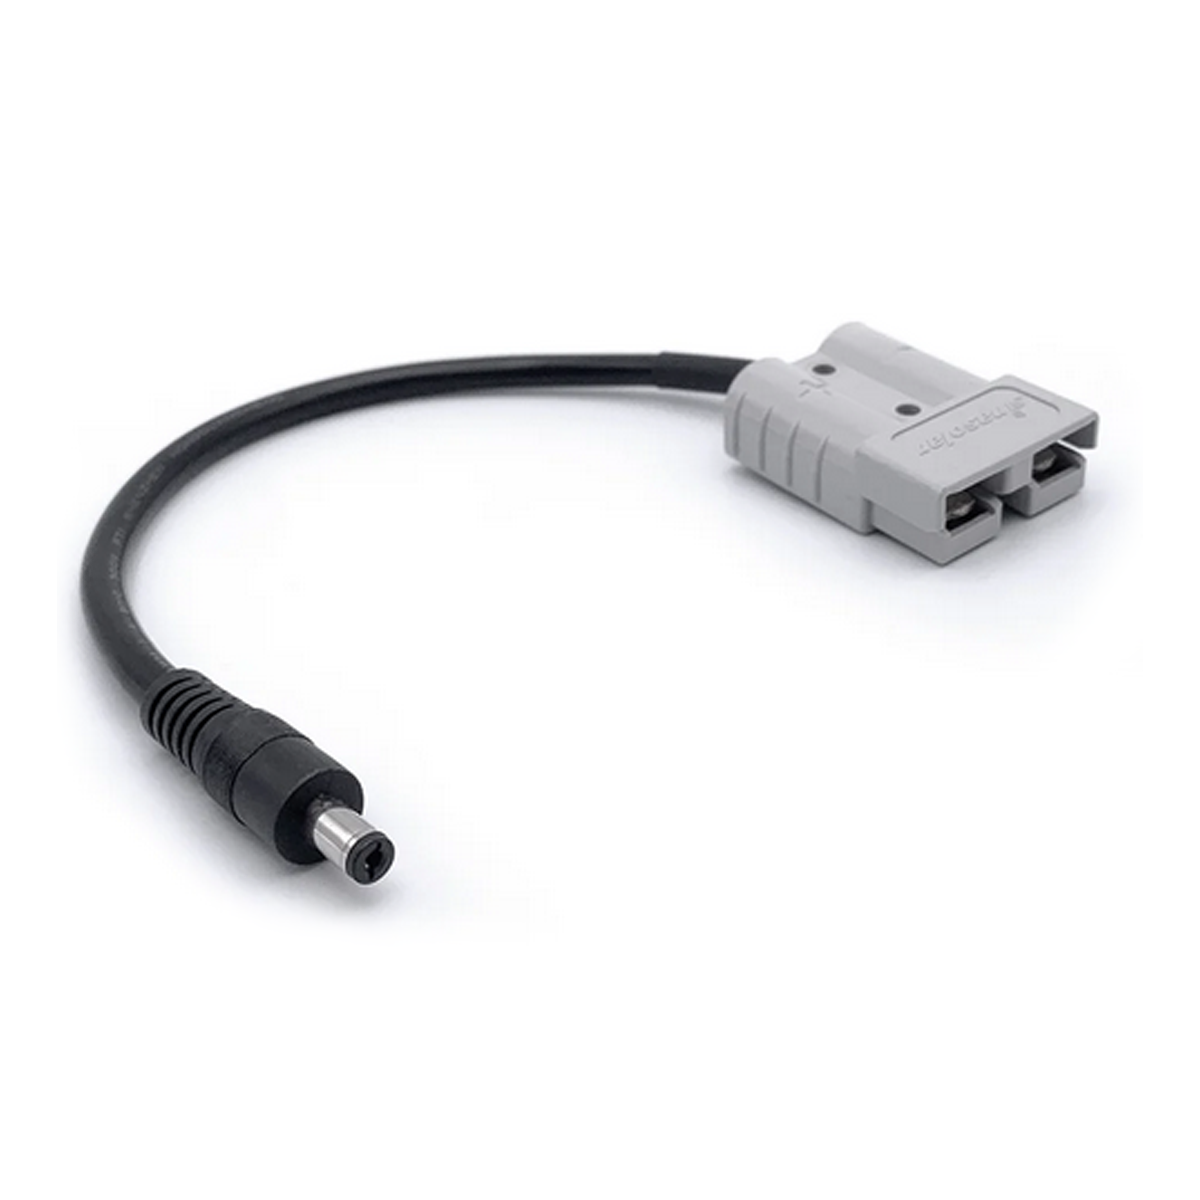 Anderson Adapter DC5521 - 20cm